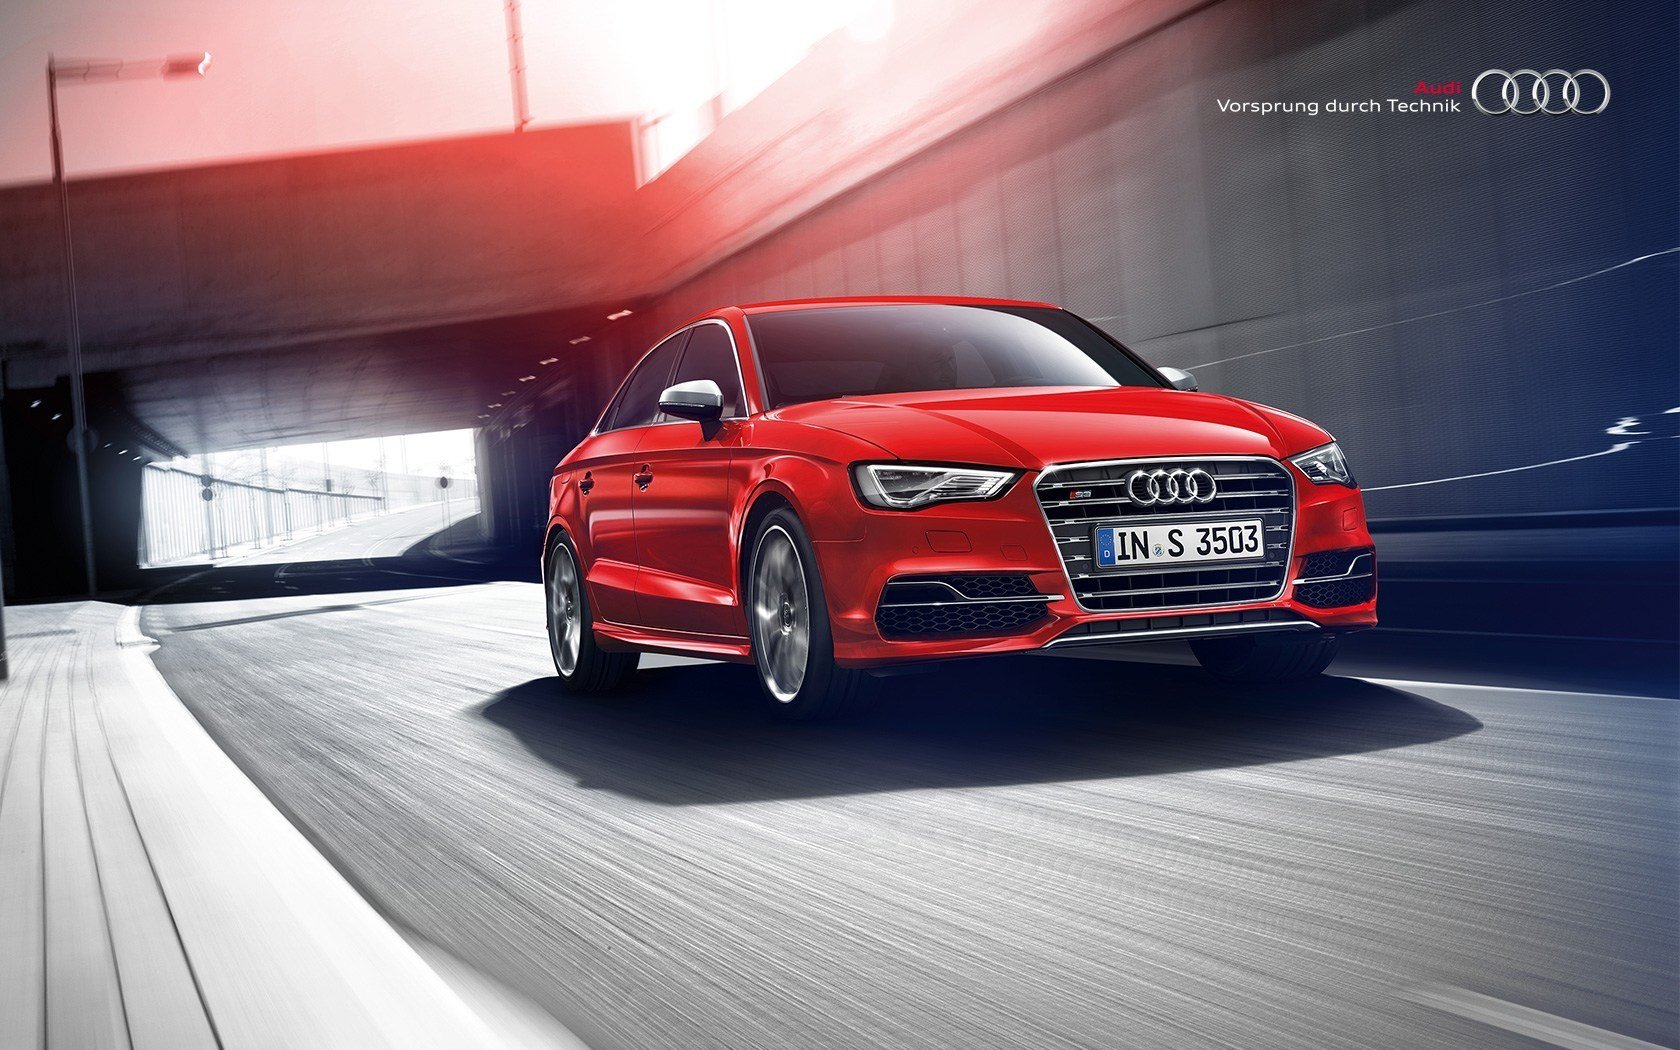 Audi A3 Sedan Wallpaper 25 Images On Genchi Info S3 Wallpapers Hd 1680x1050